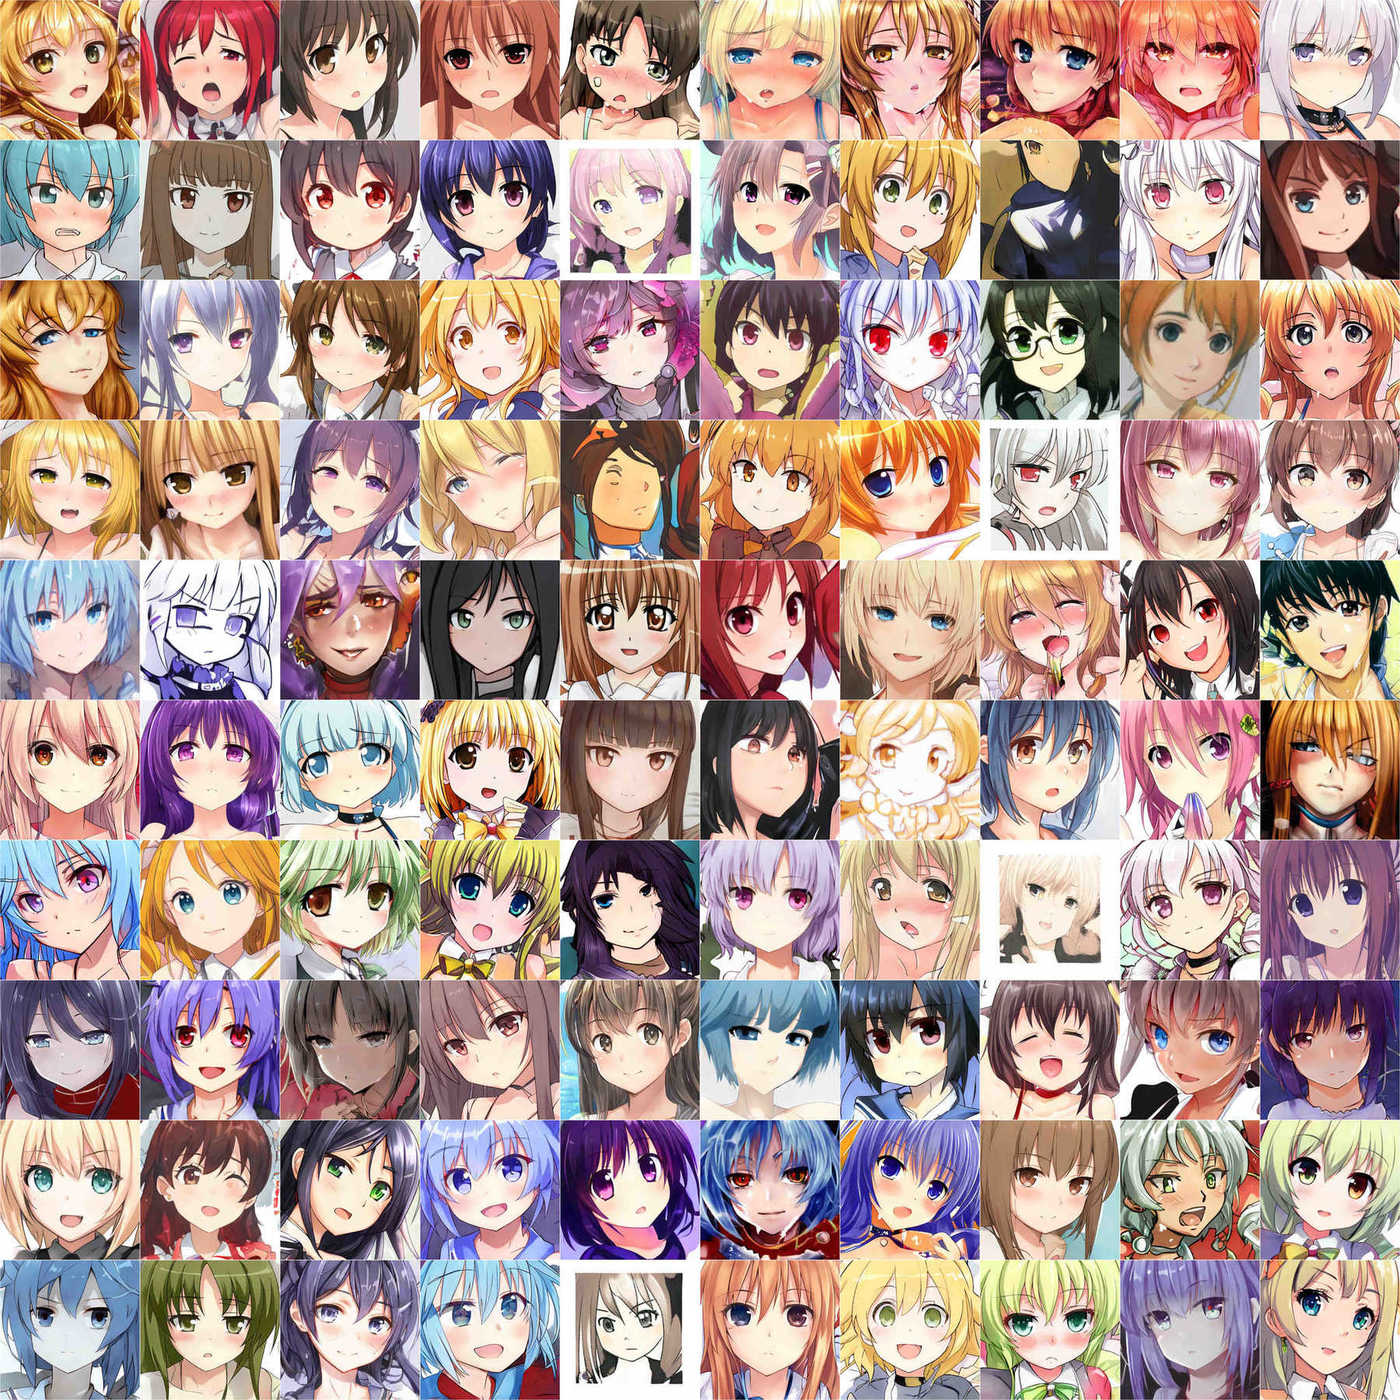 100 random sample images from the StyleGAN anime faces on TWDNE